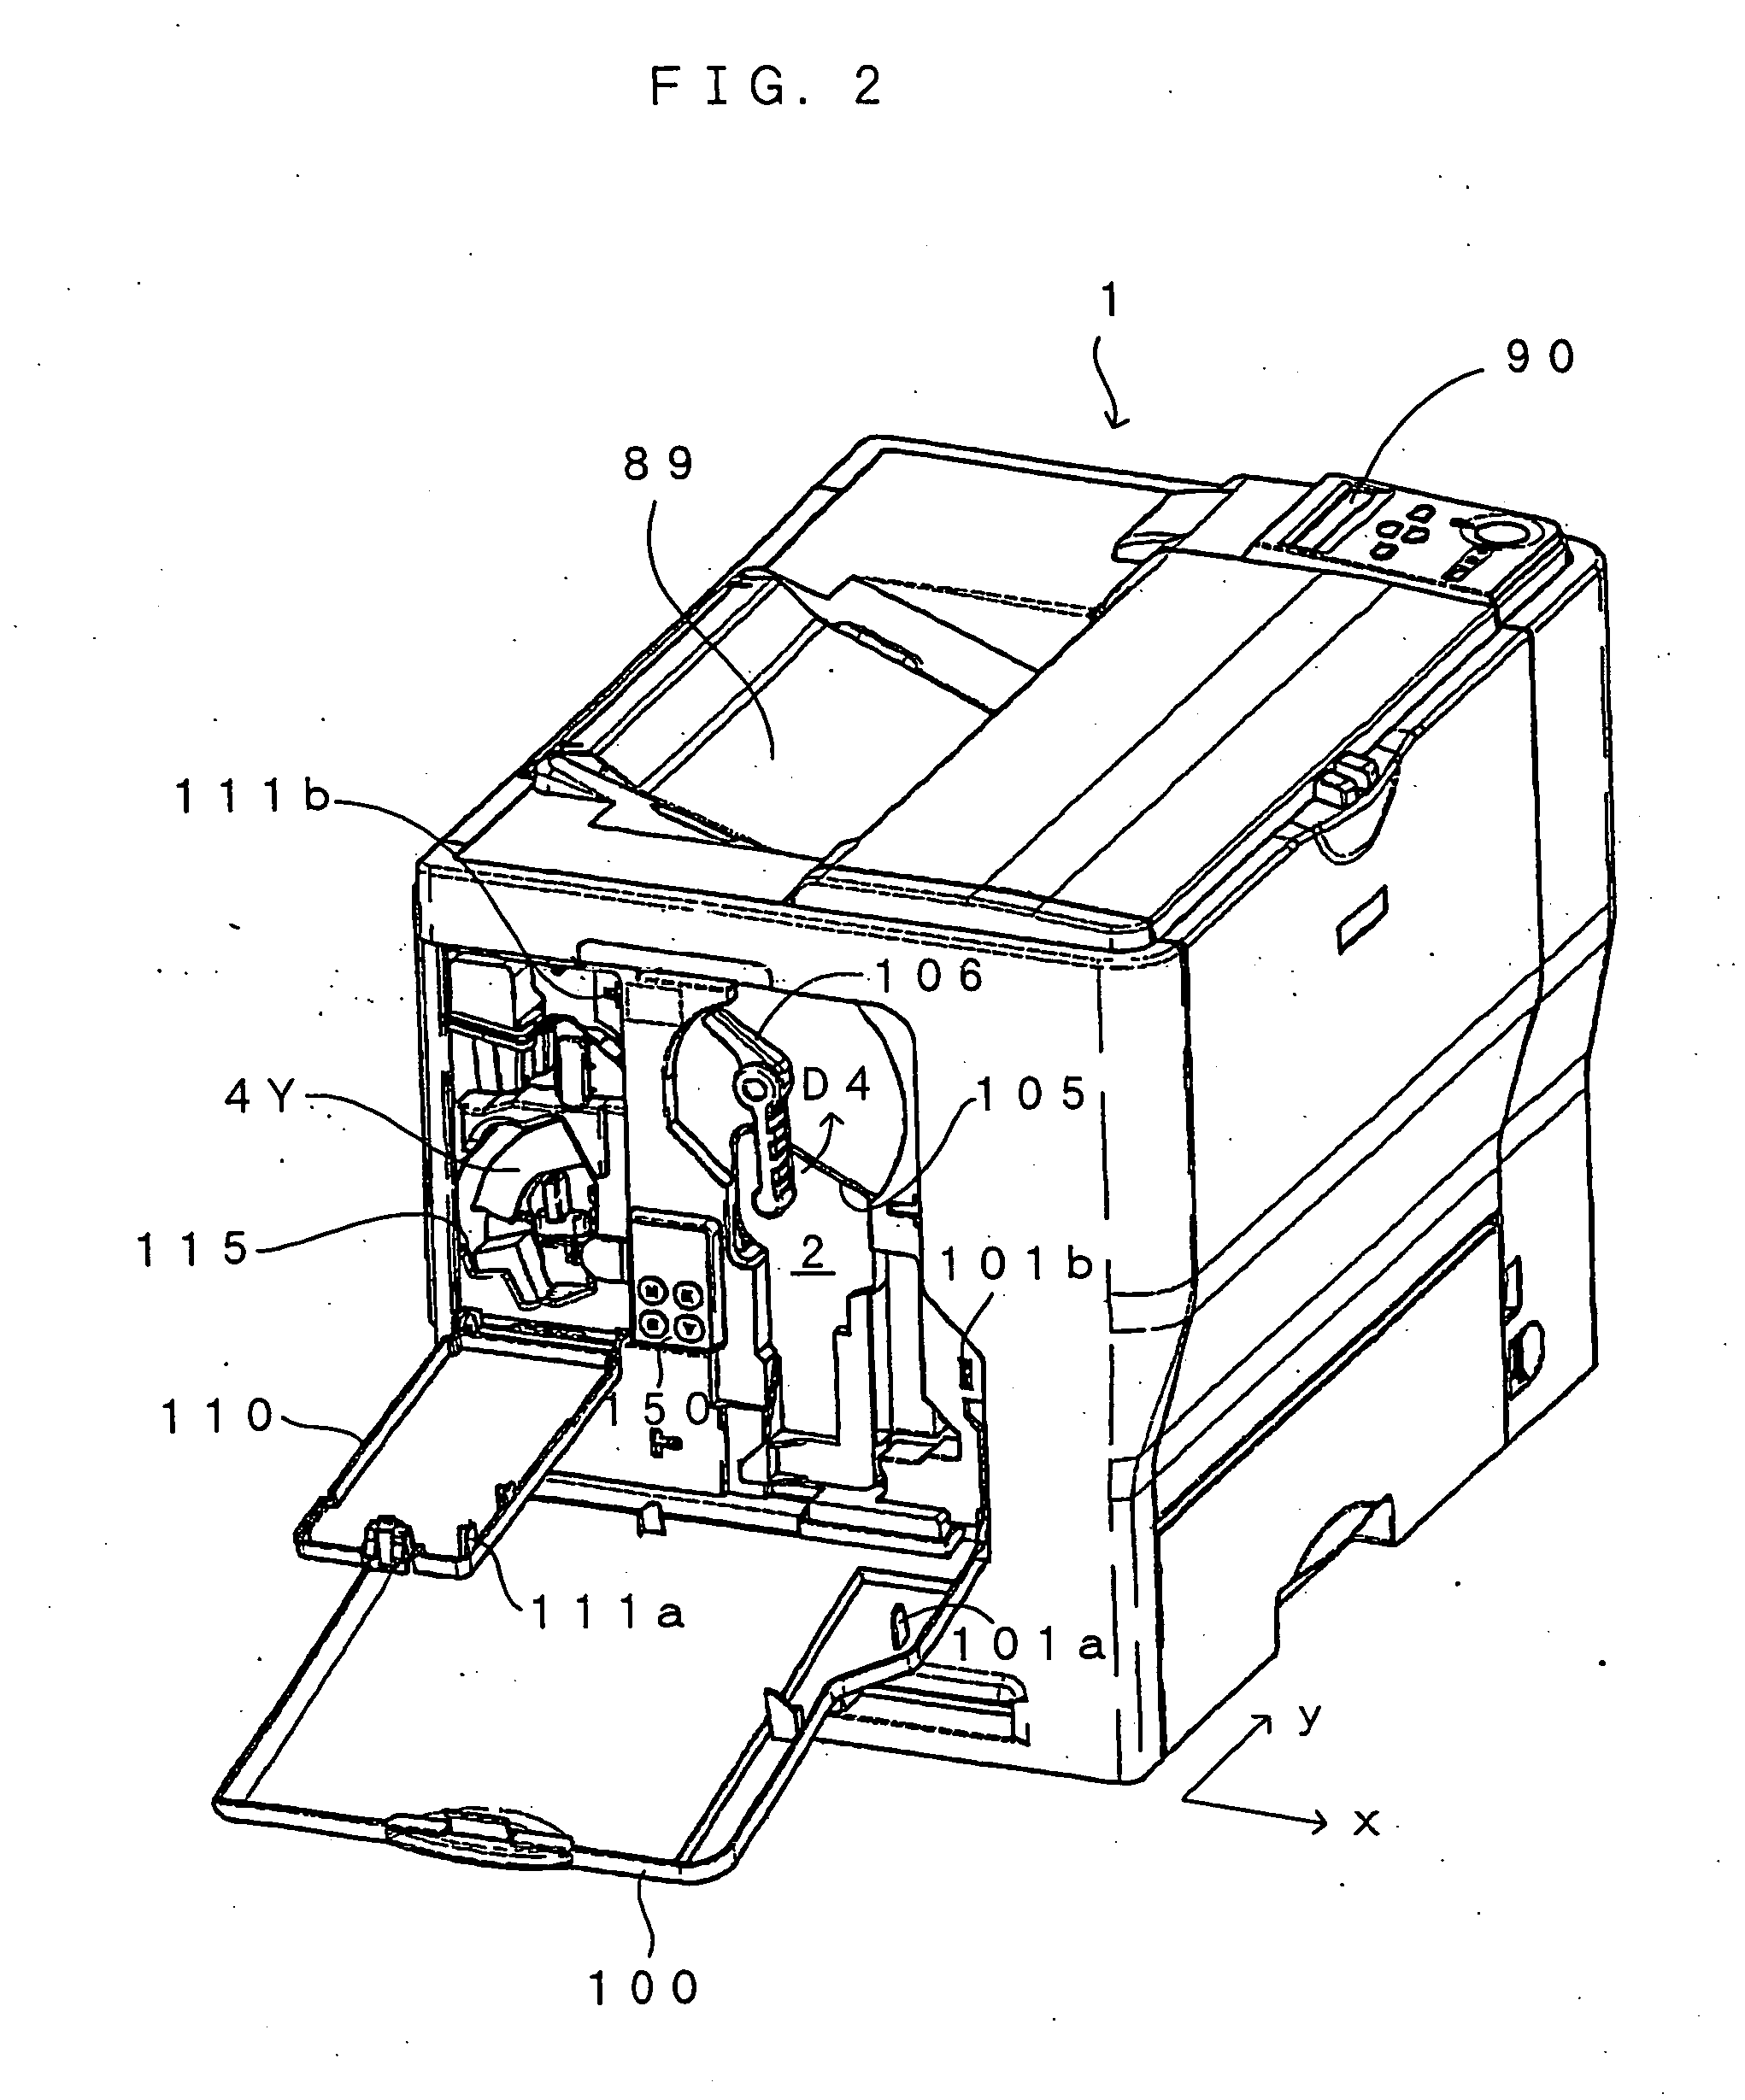 Image forming apparatus and a storage controlling method for information on an improper detachment of a developer cartridge to be written in a cartridge storage means